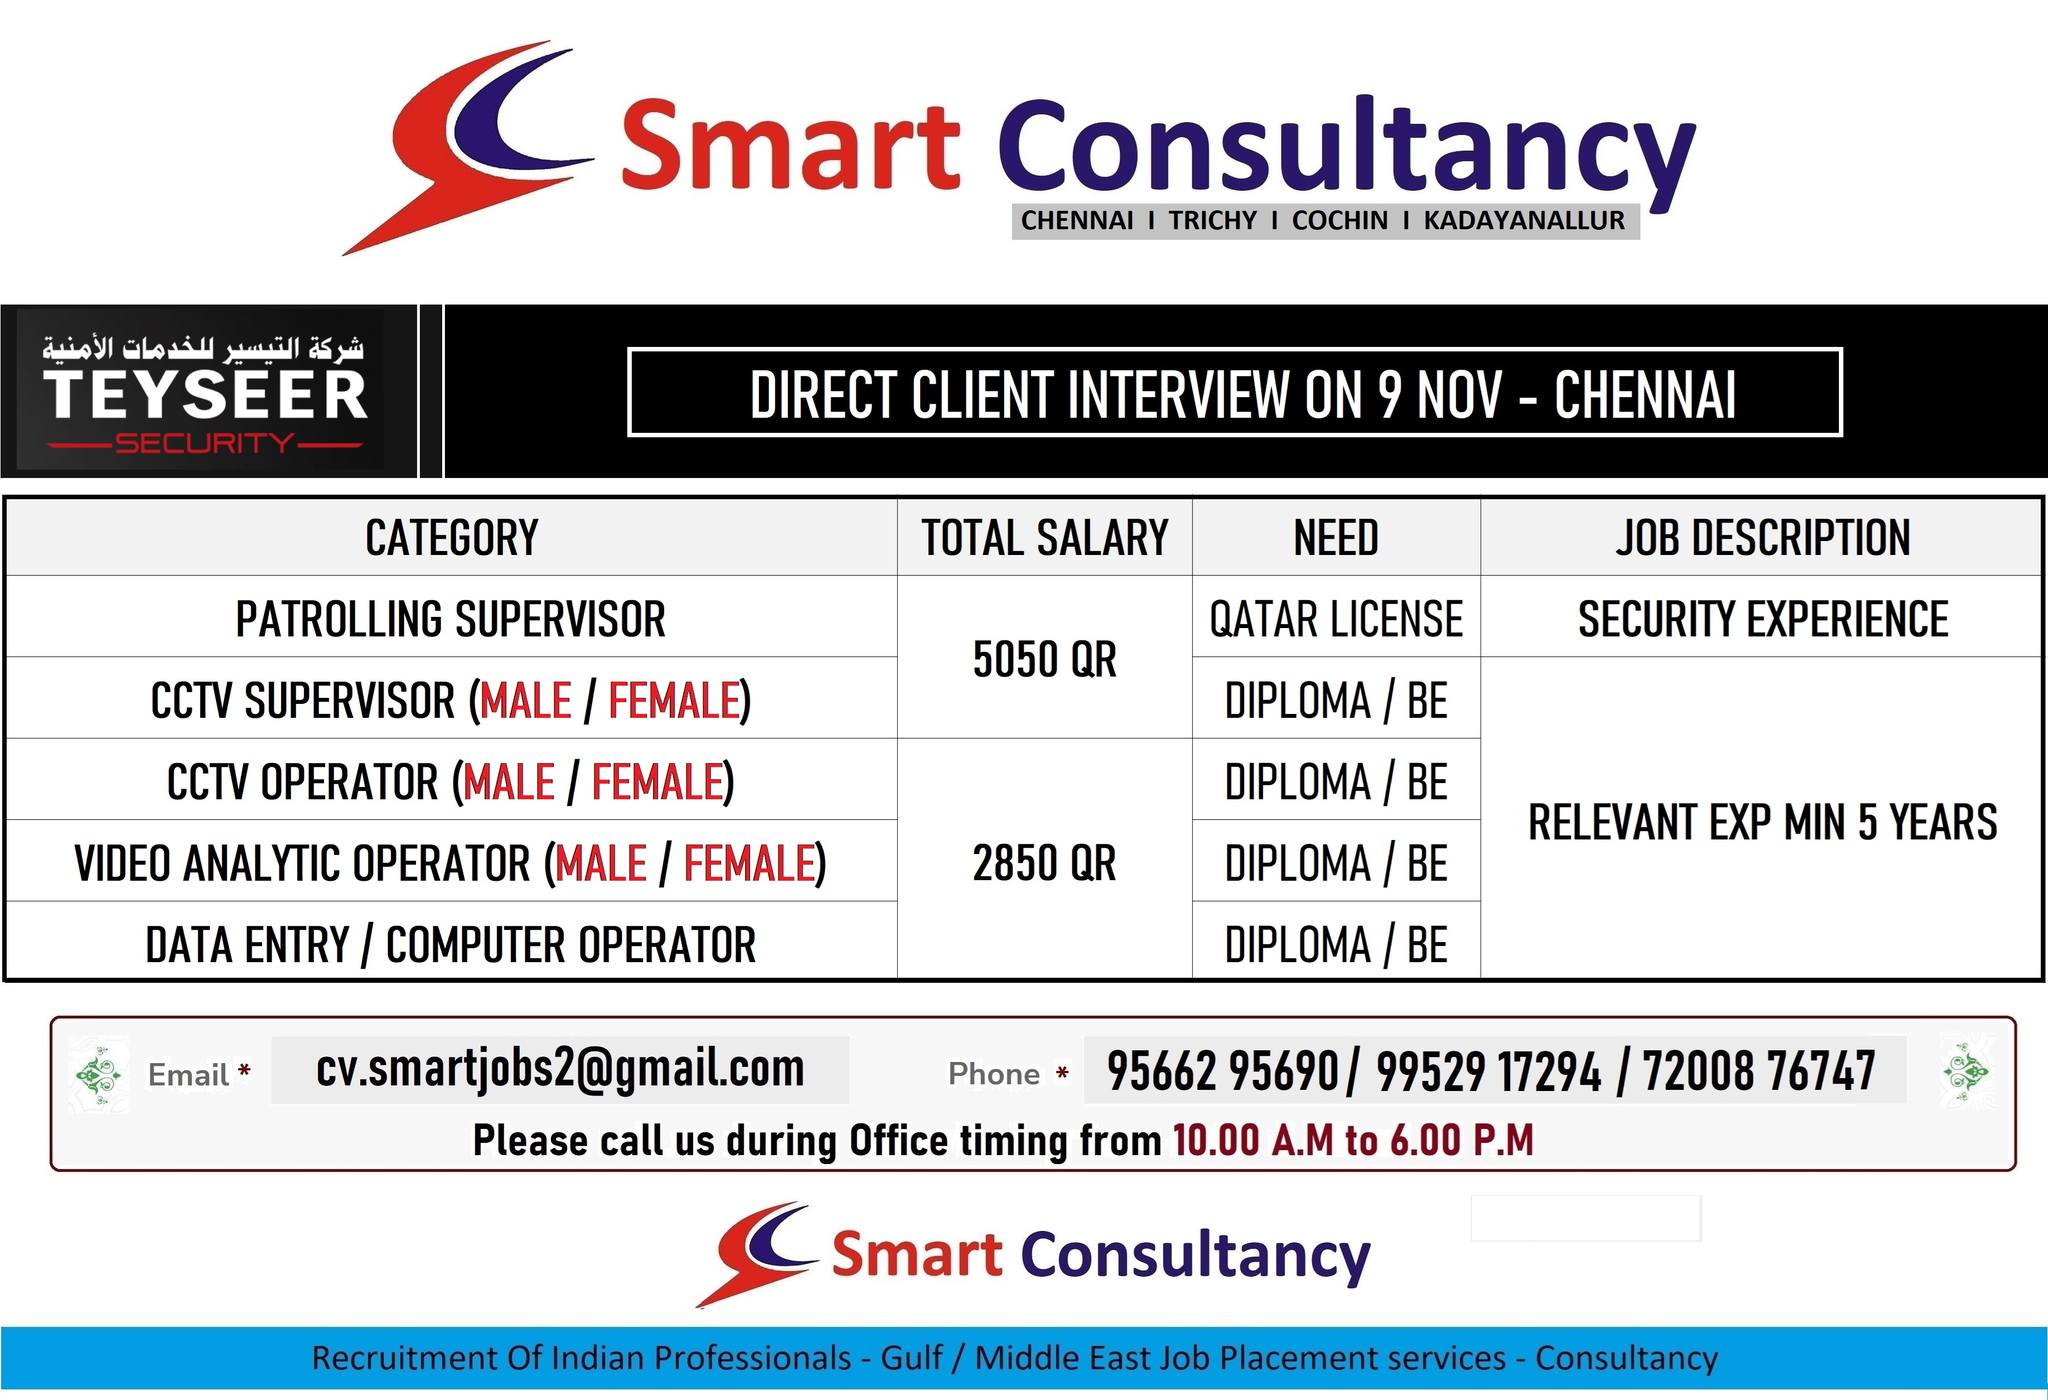 WANTED FOR TEYSEER - QATAR / DIRECT CLIENT INTERVIEW ON 9 NOV - CHENNAI 